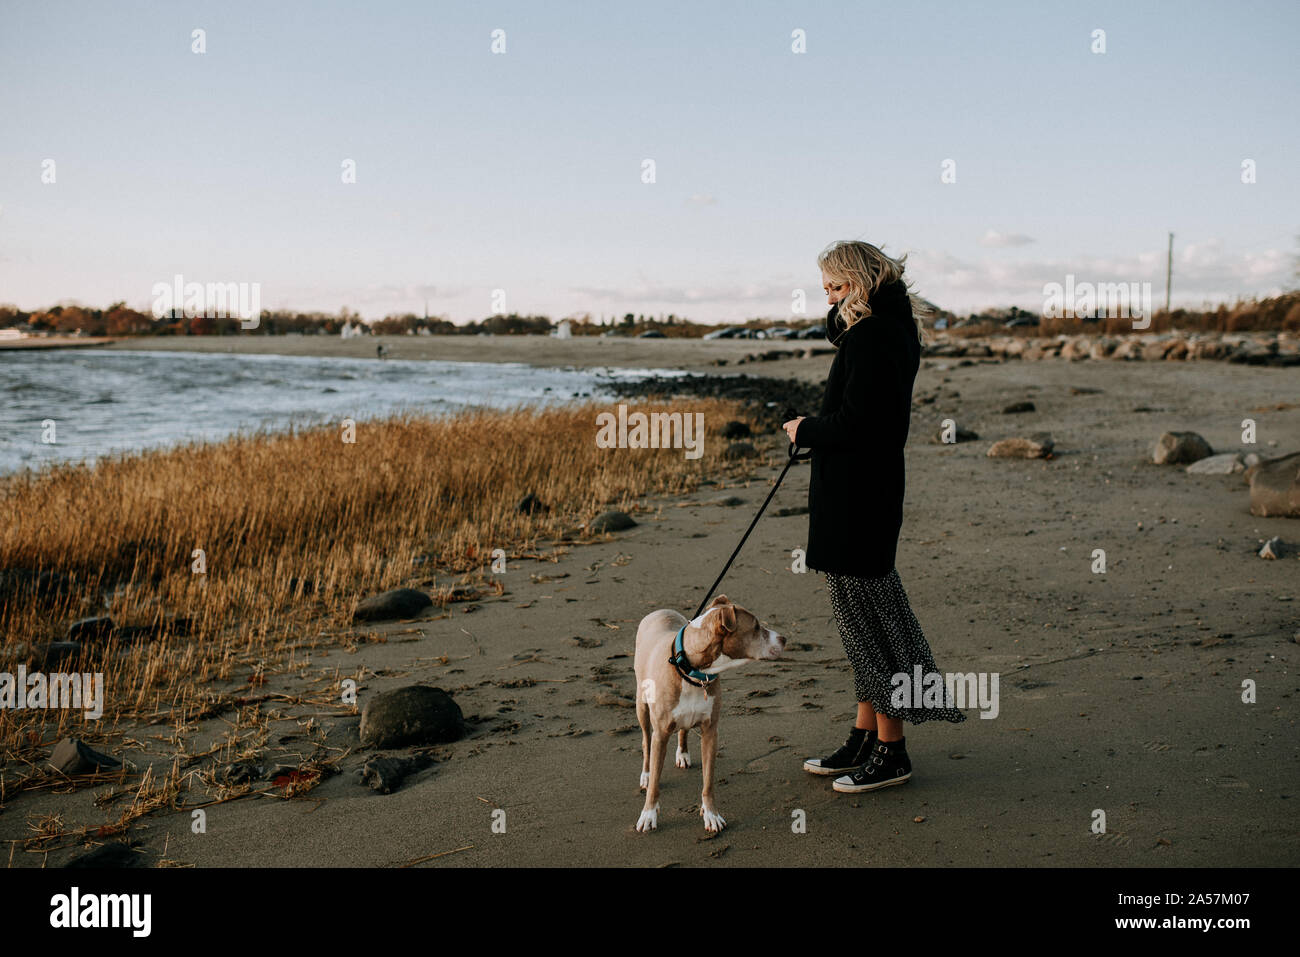 Woman standing on beach with dog in wintertime Banque D'Images